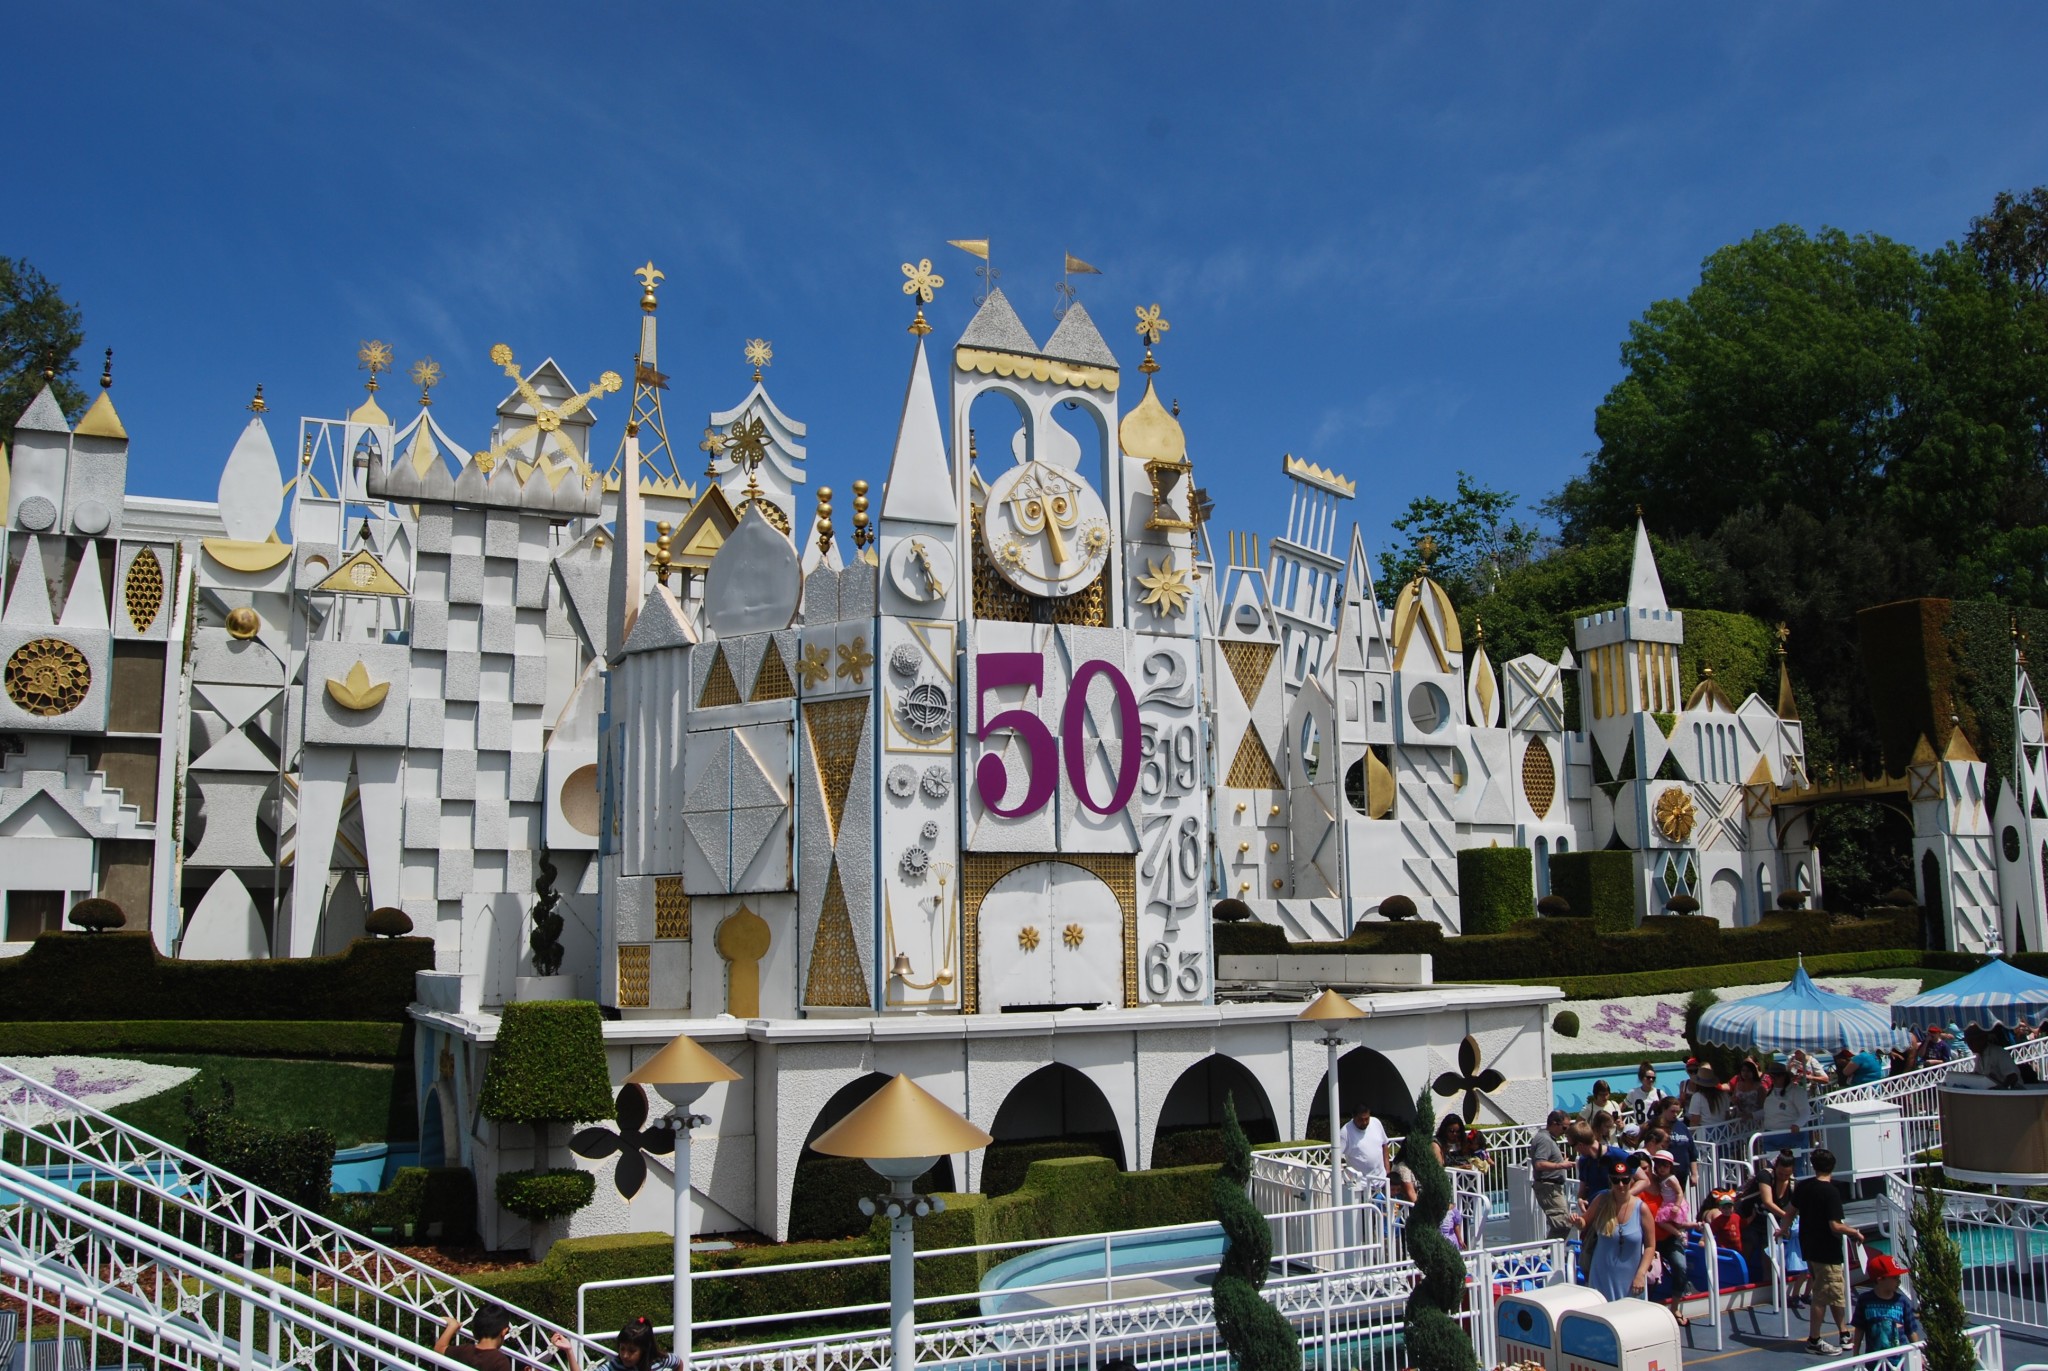 “It’s a Small World” Movie to Hit the Big Screen